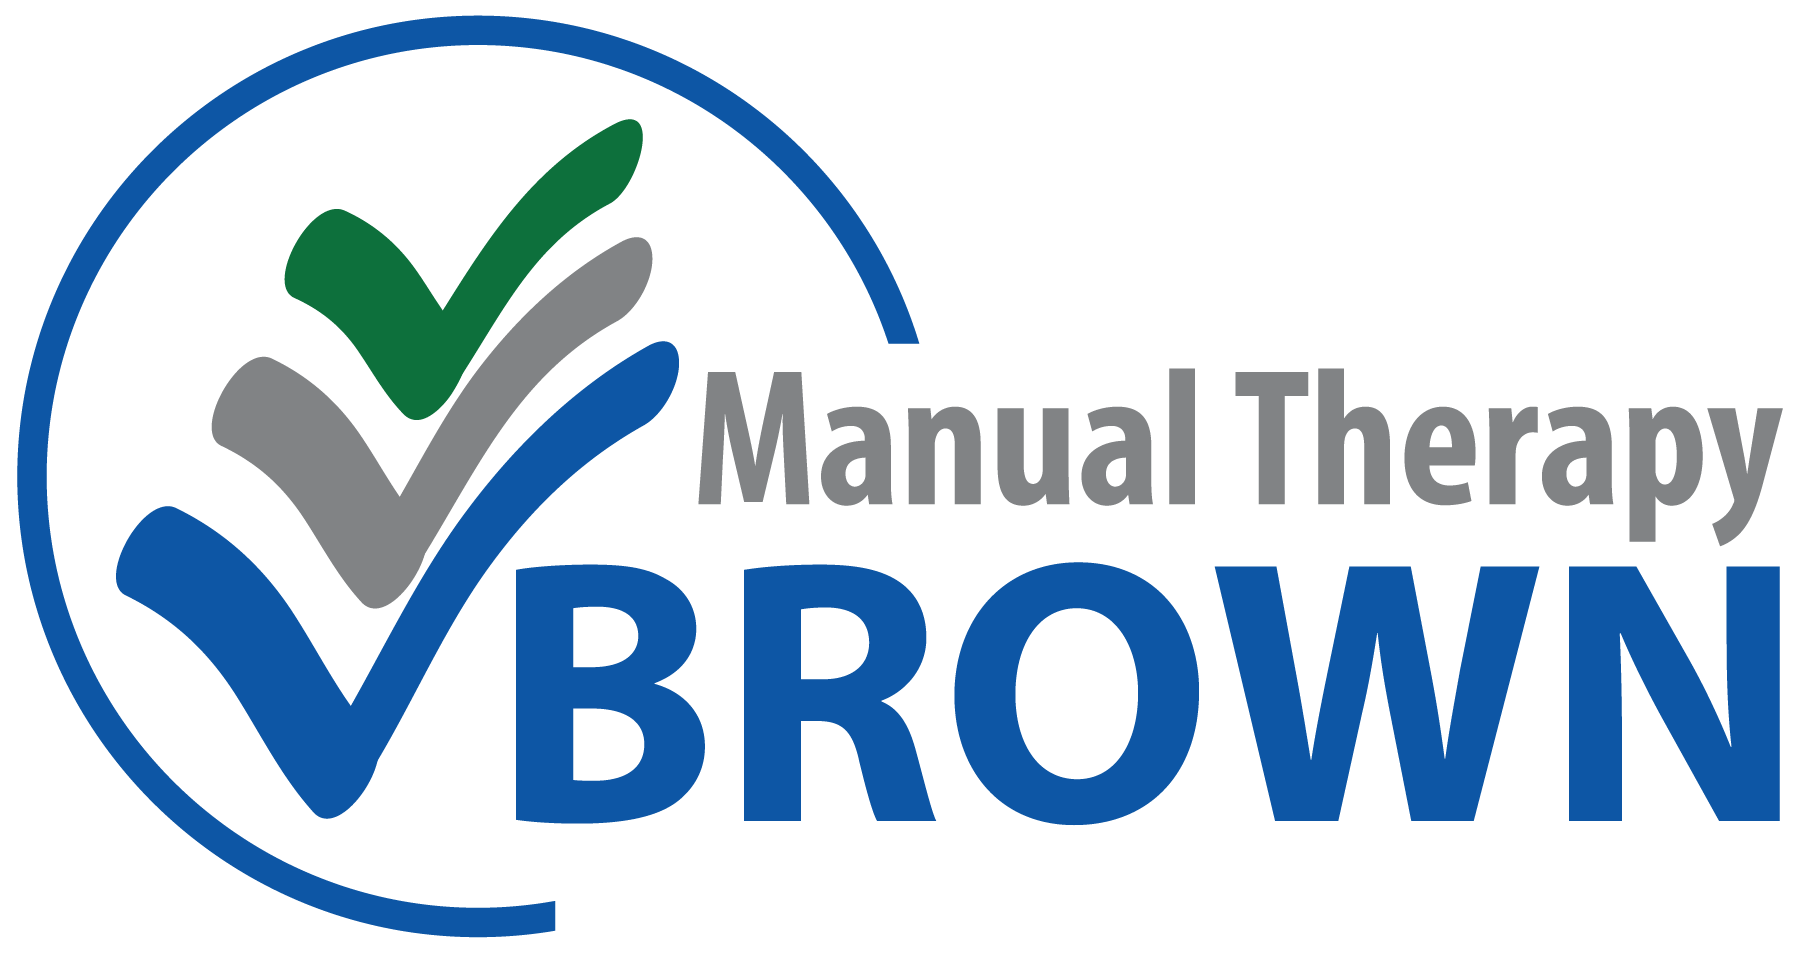 BROWN Manual Therapy 